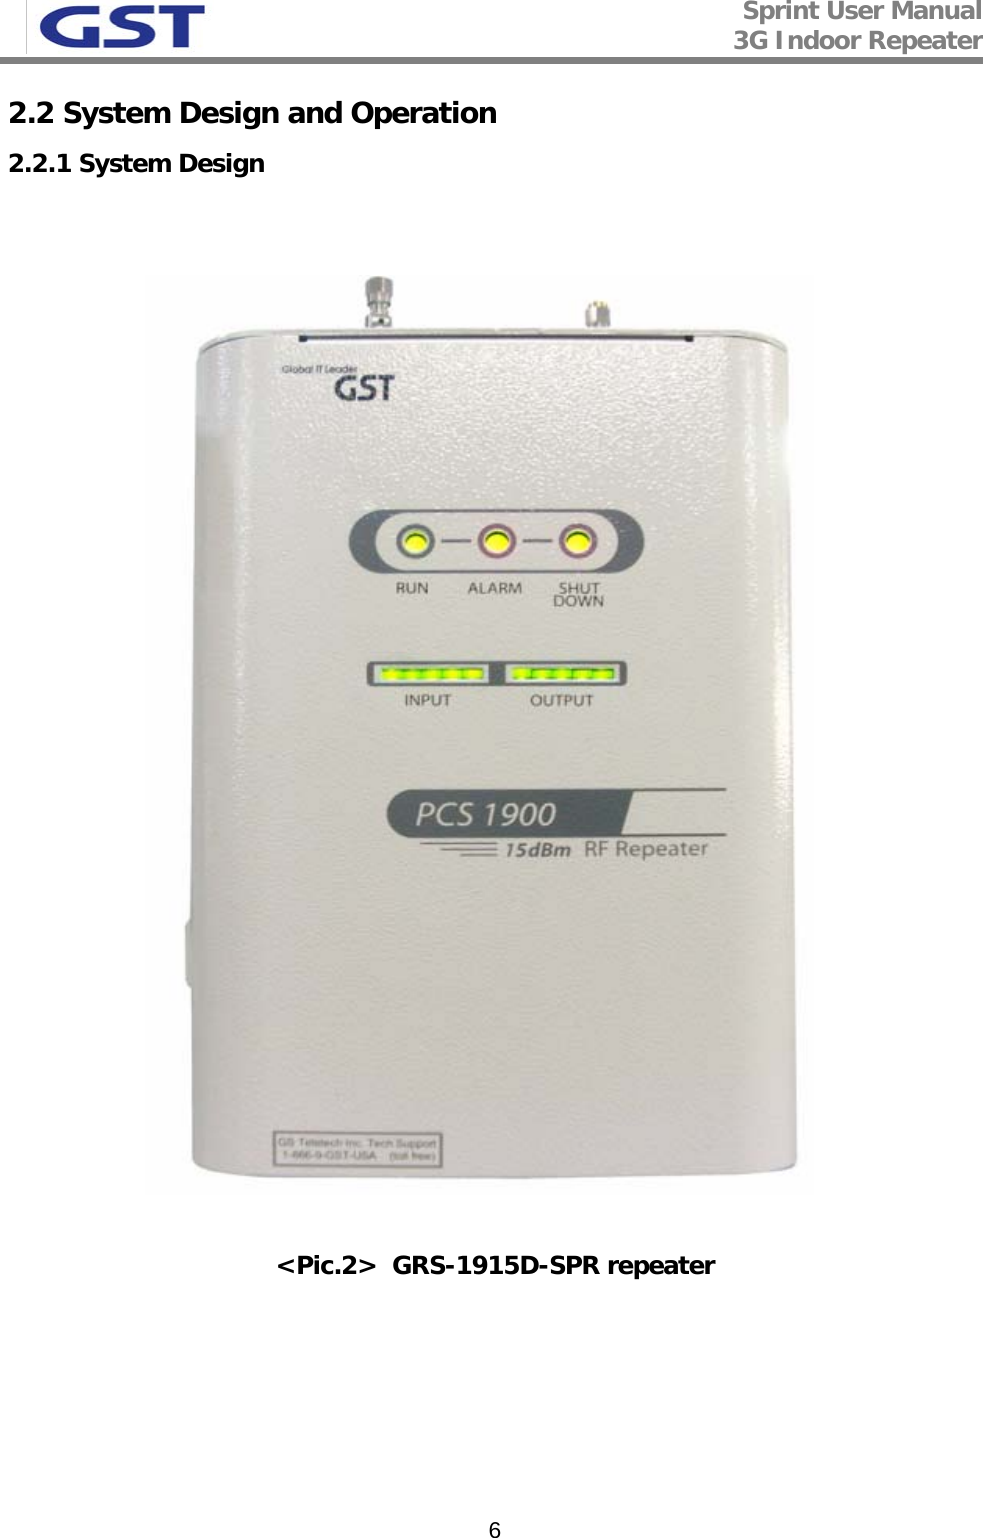 Sprint User Manual 3G Indoor Repeater   62.2 System Design and Operation 2.2.1 System Design     &lt;Pic.2&gt;  GRS-1915D-SPR repeater      